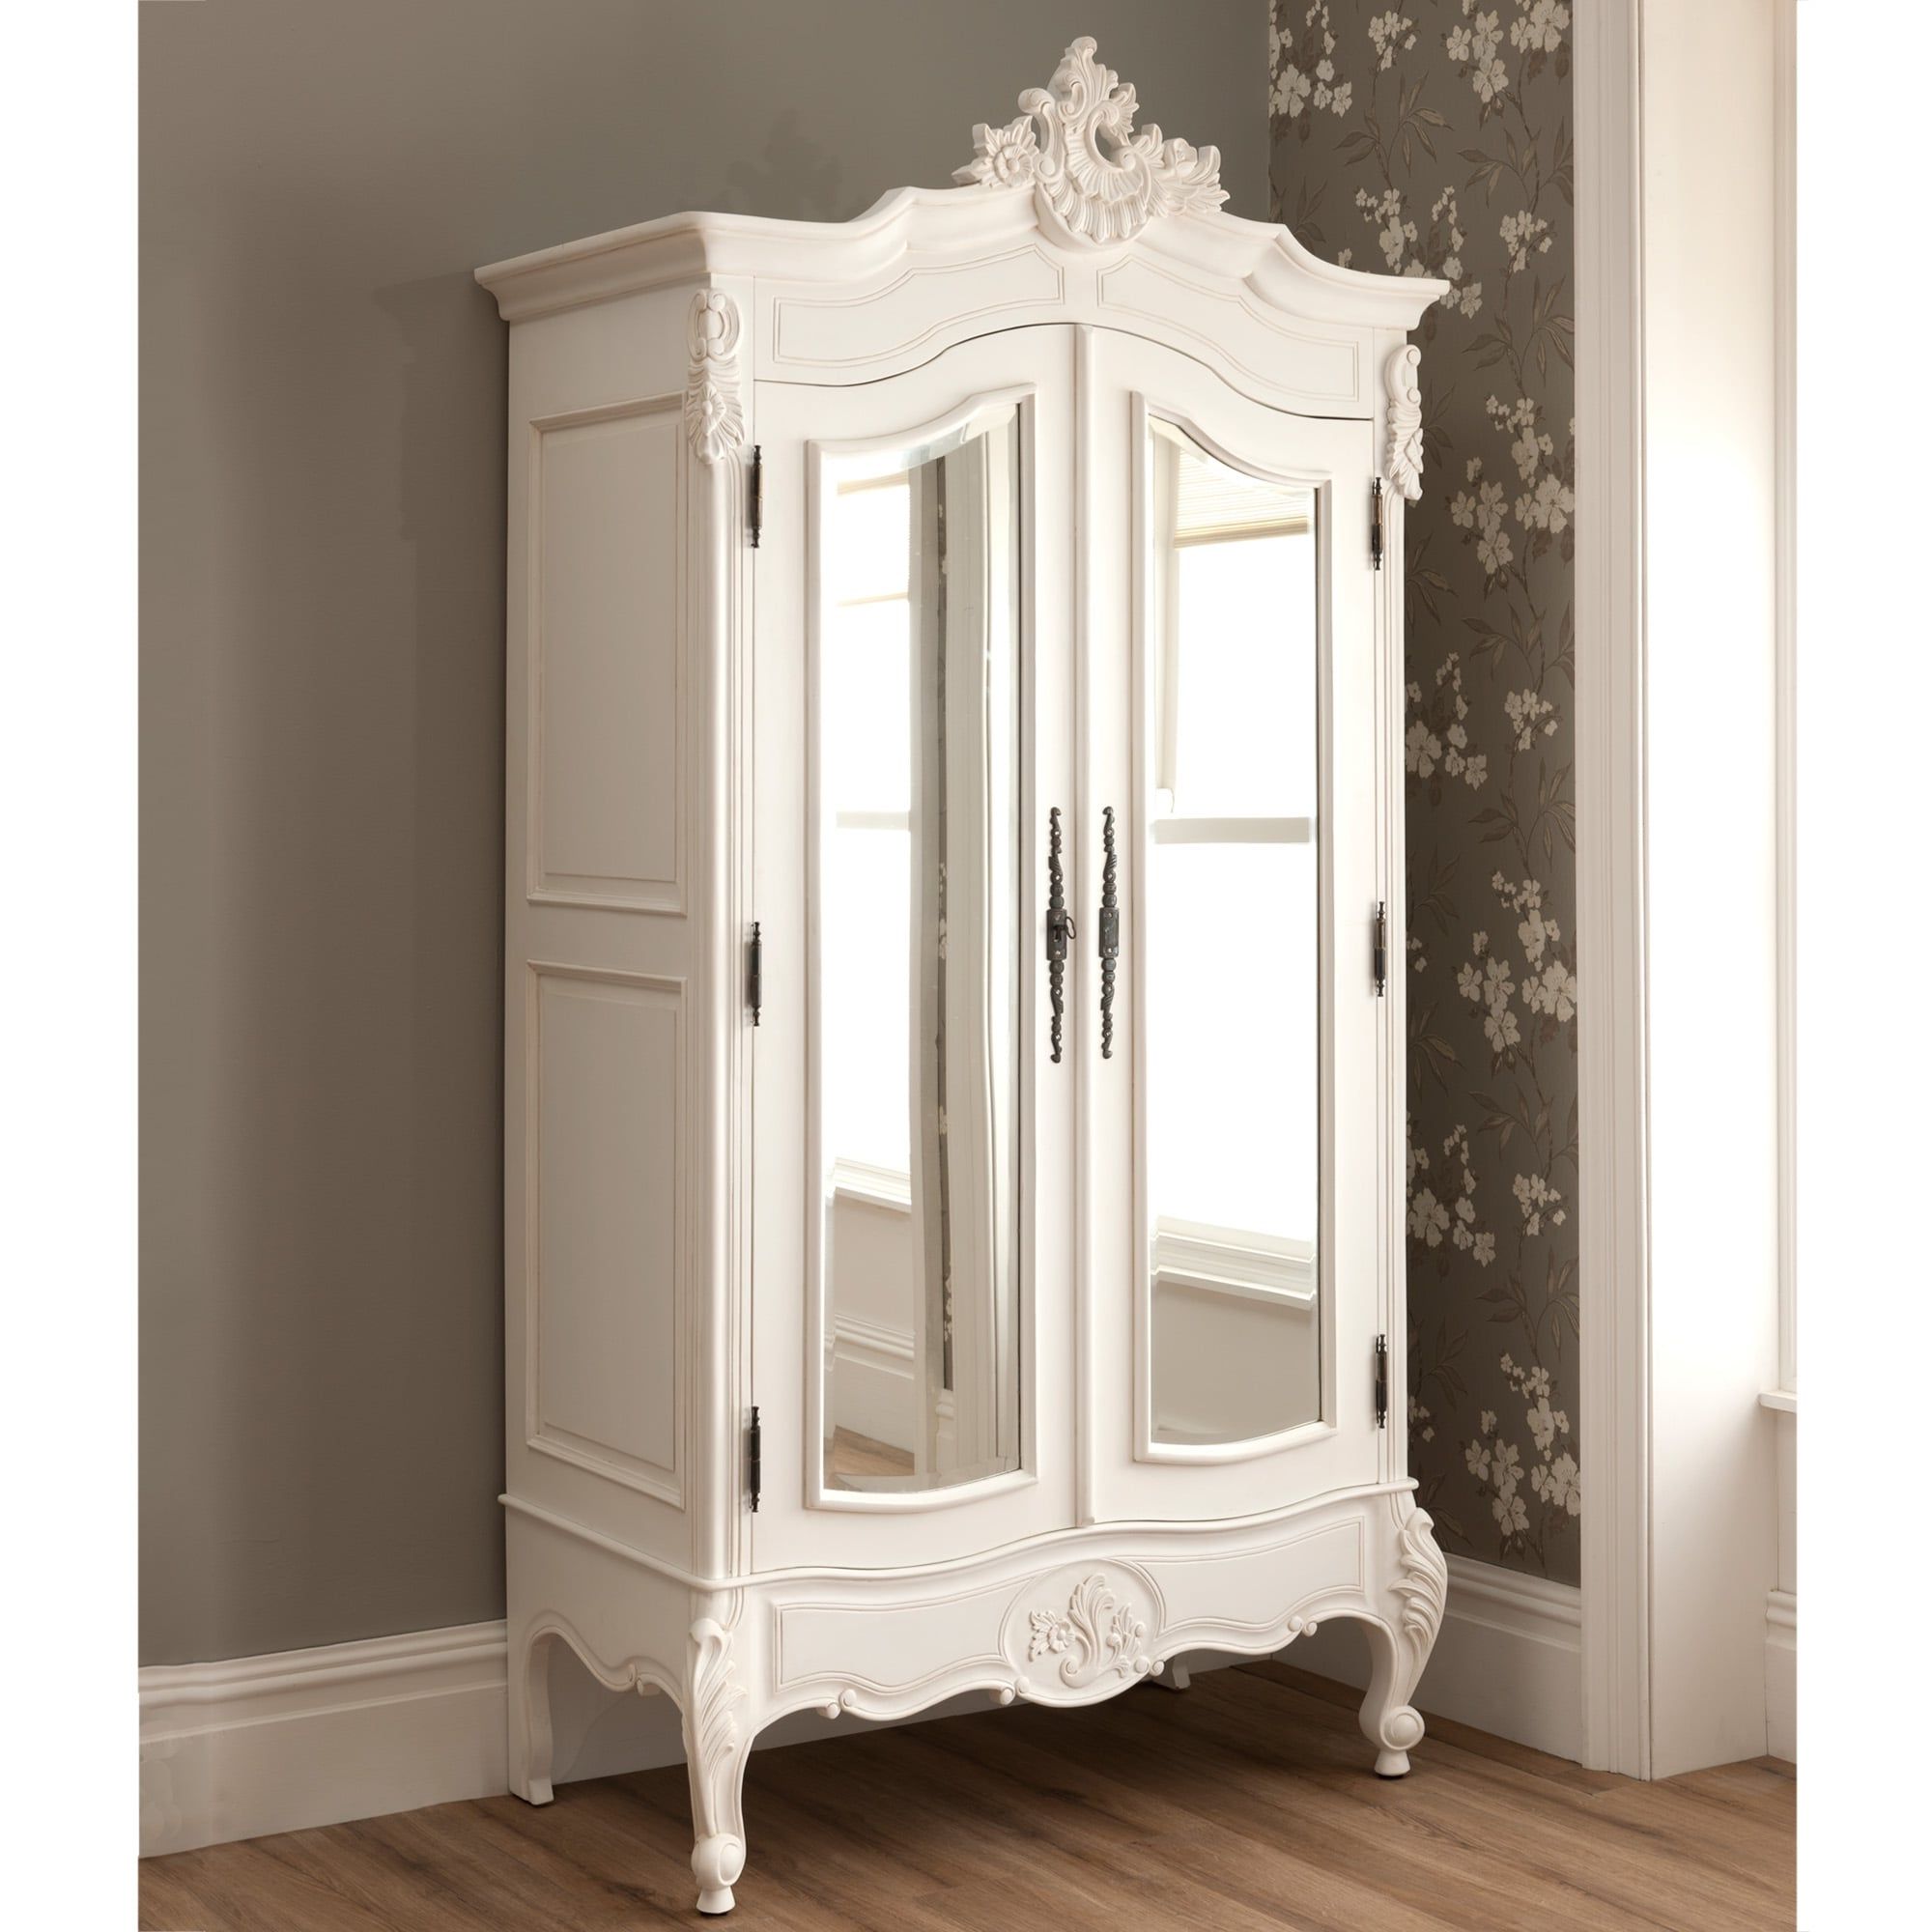 La Rochelle Antique French Mirrored 2 Door Wardrobe Within French Style Wardrobes (View 2 of 20)